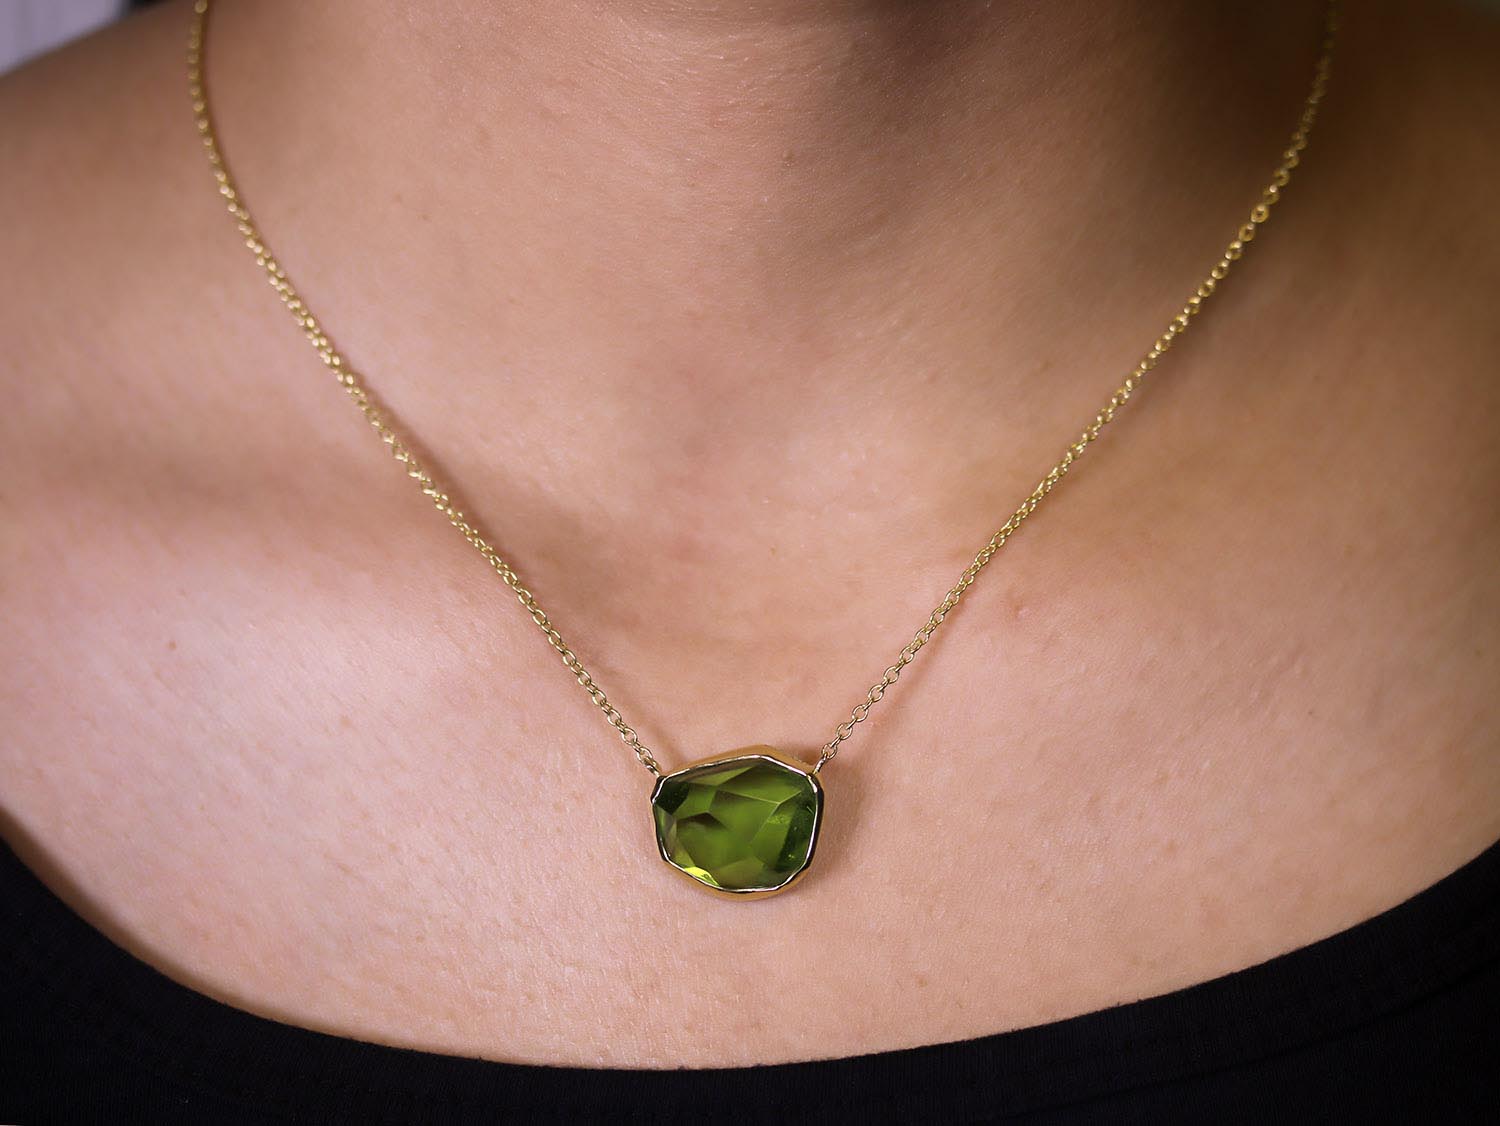 Freeform Peridot Pendant Necklace in 18K Yellow Gold